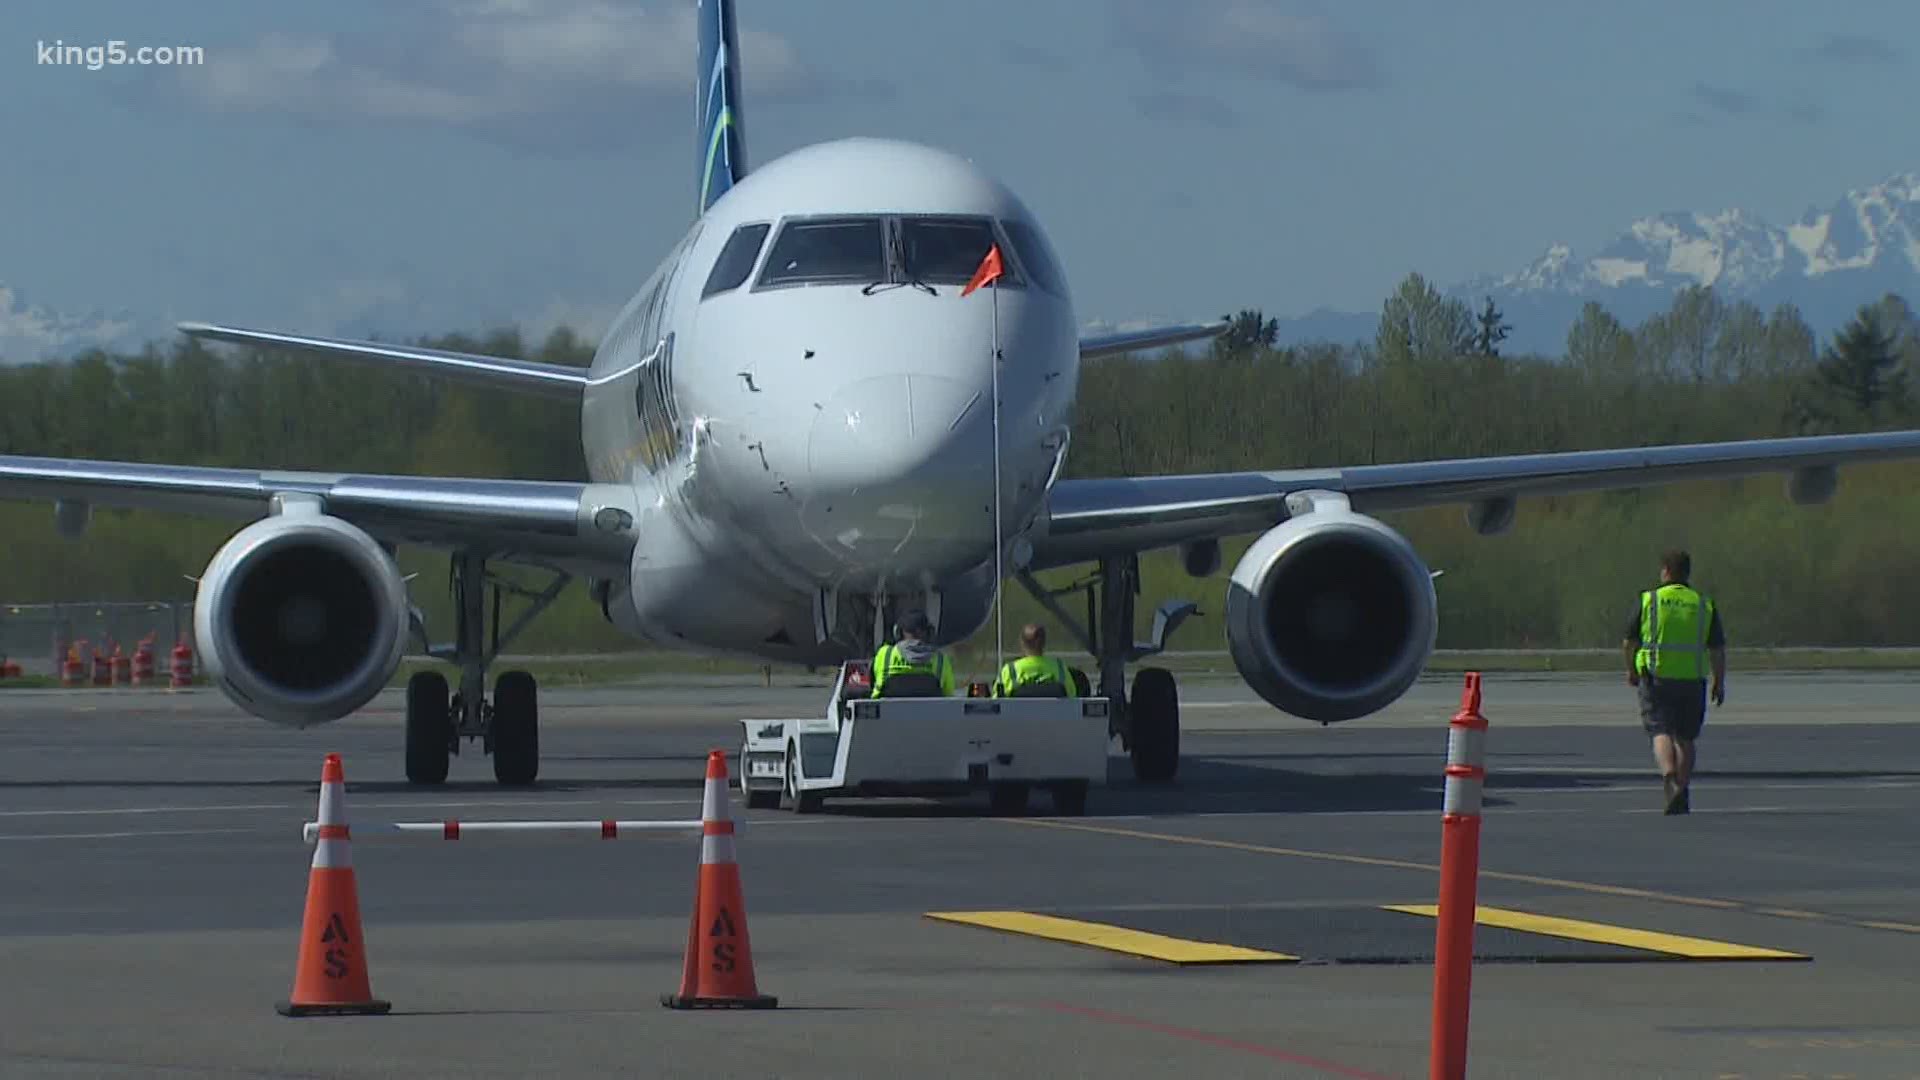 When a $300 million relief package was announced yesterday to help airports survive coronavirus, Paine Field couldn't breathe a sigh of relief.